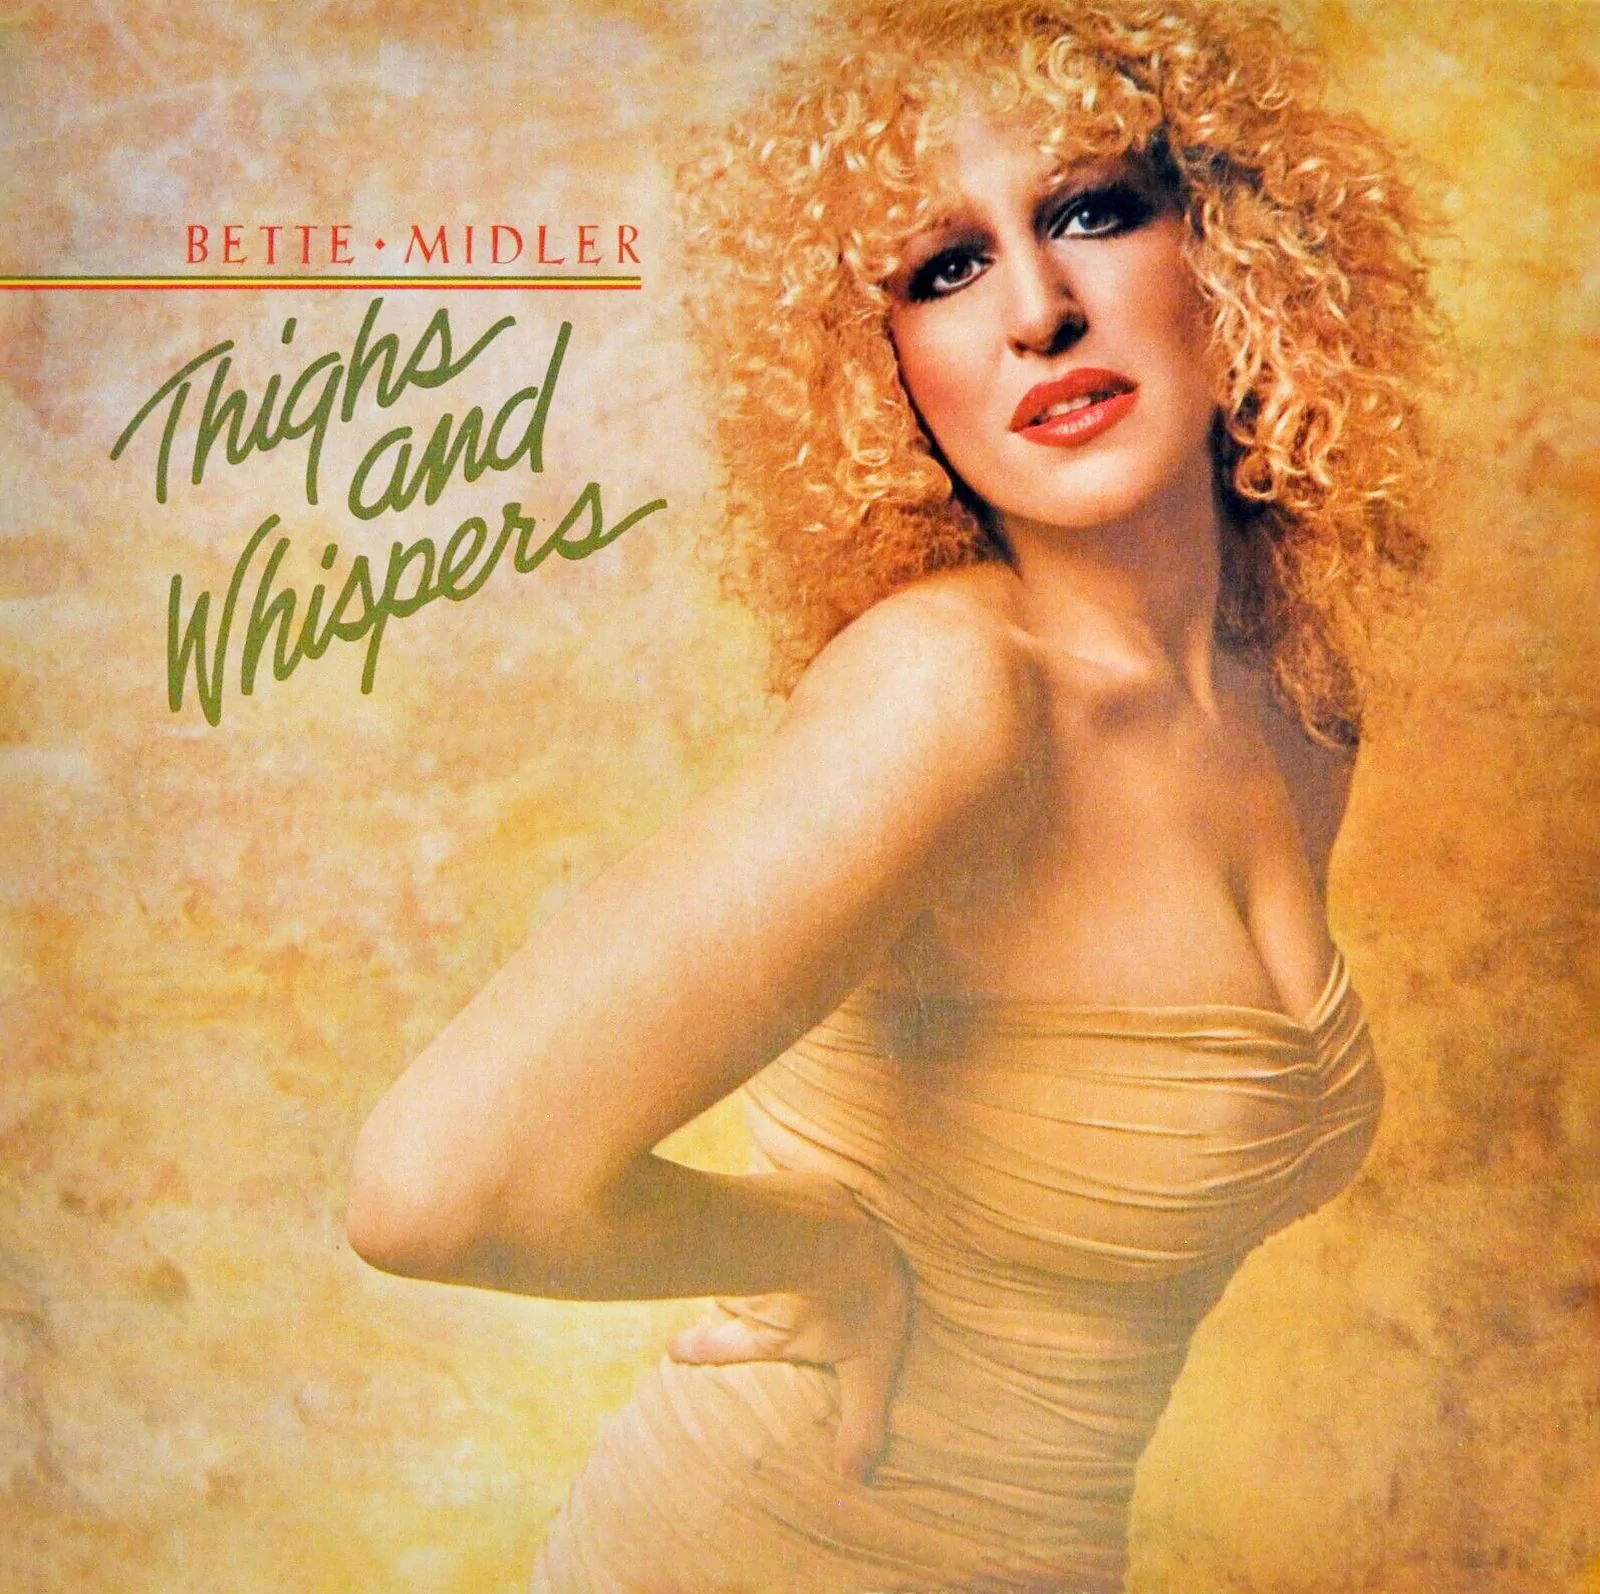 Bette Midler on the cover of the album "Thighs and Whispers", 1979